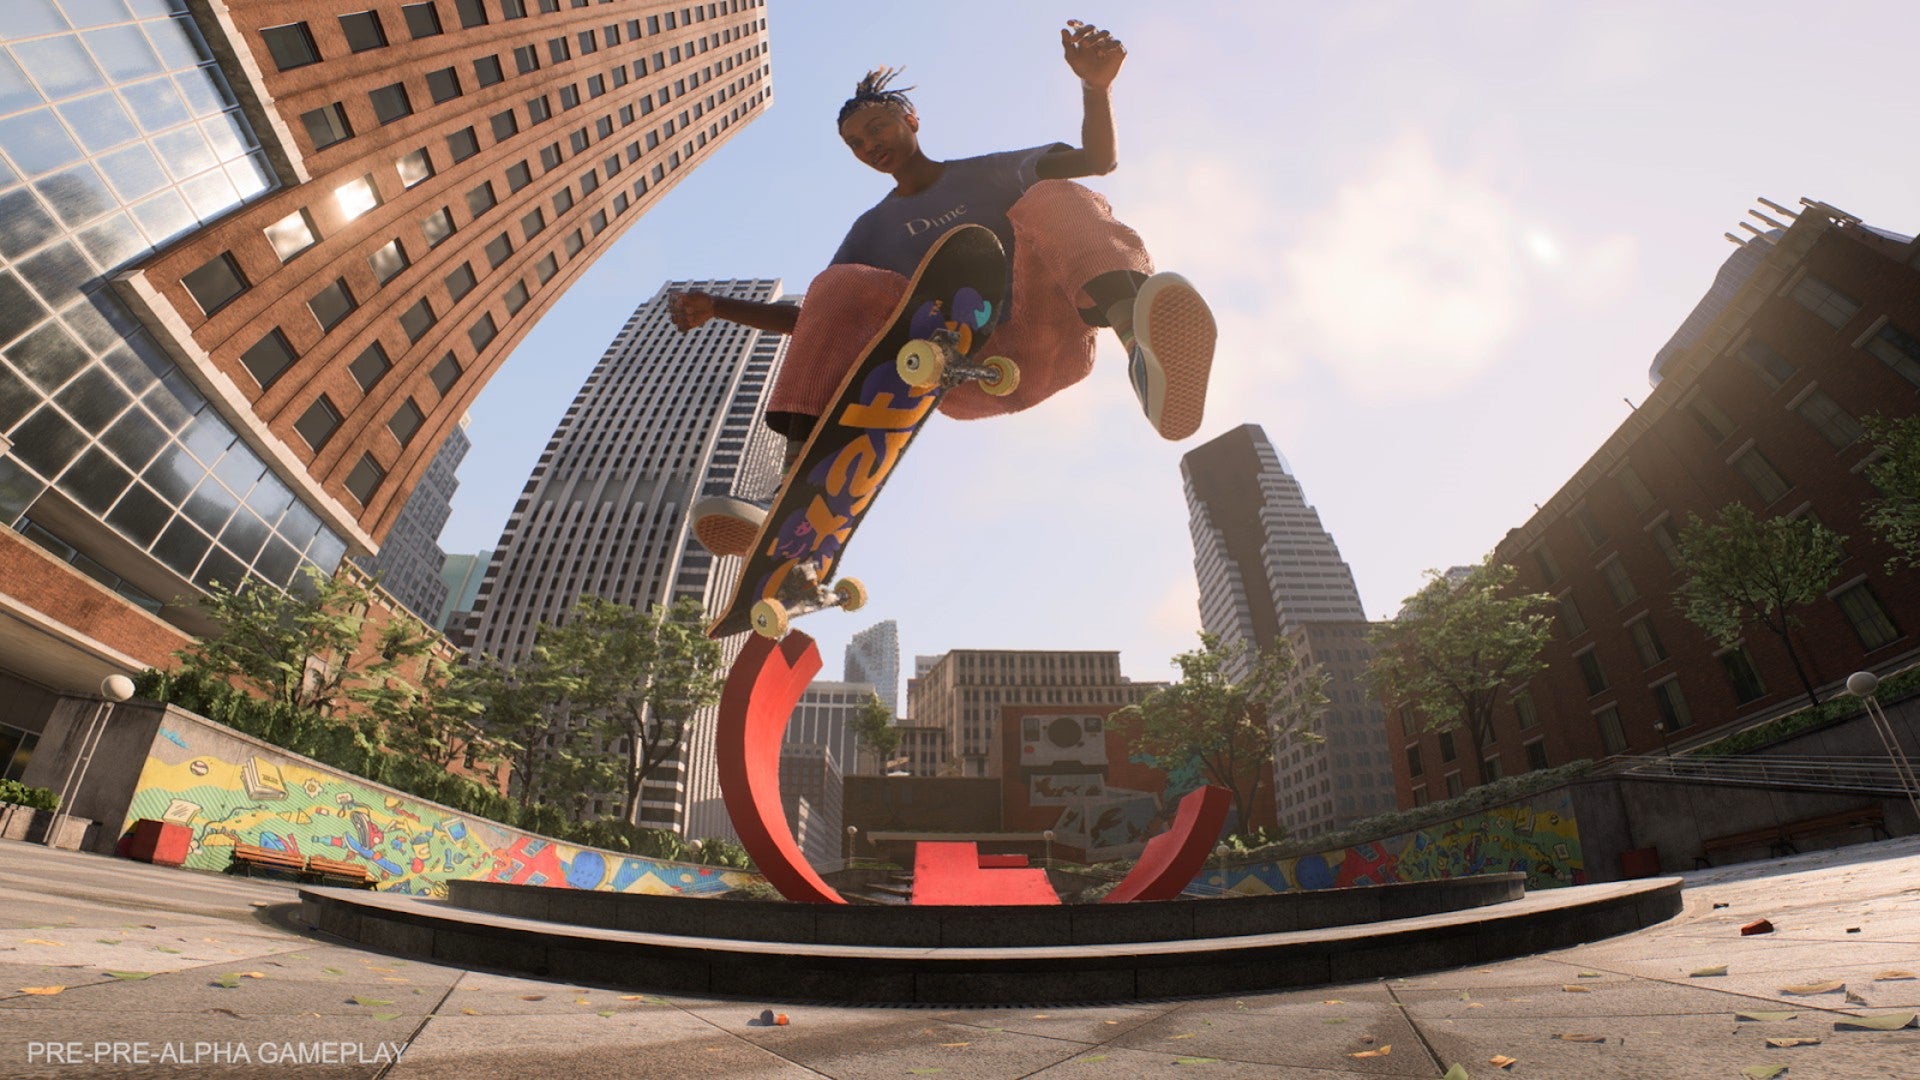 EA's Skate is an upcoming free-to-play live-service game from developers Full Circle.